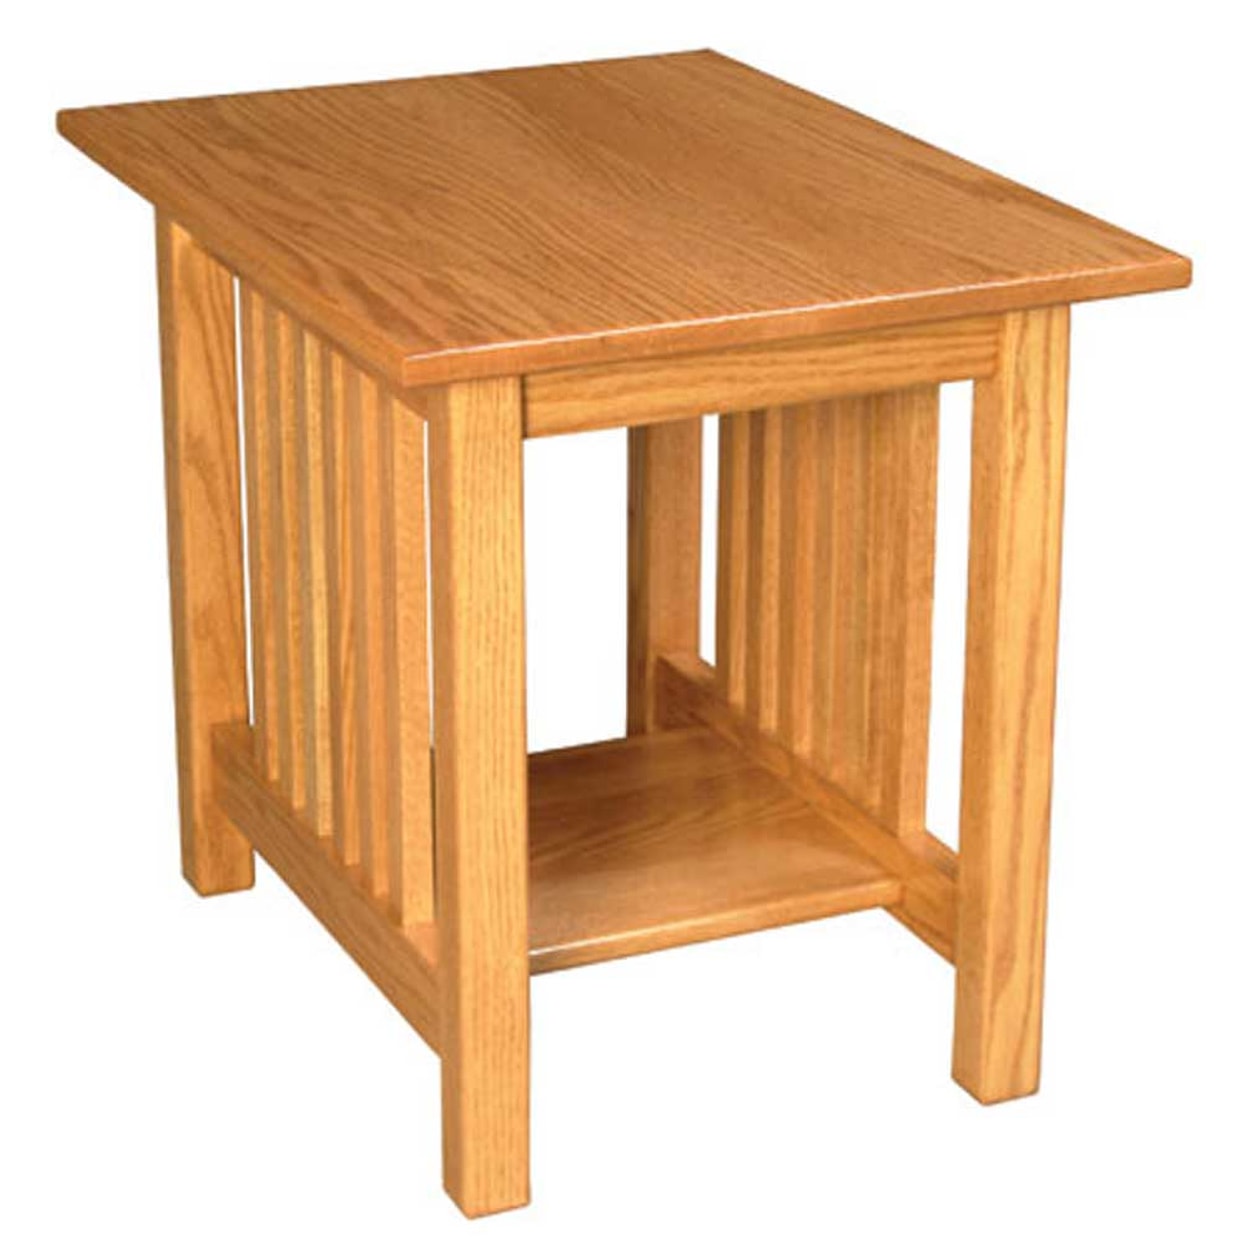 Simply Amish Mission Amish End Table